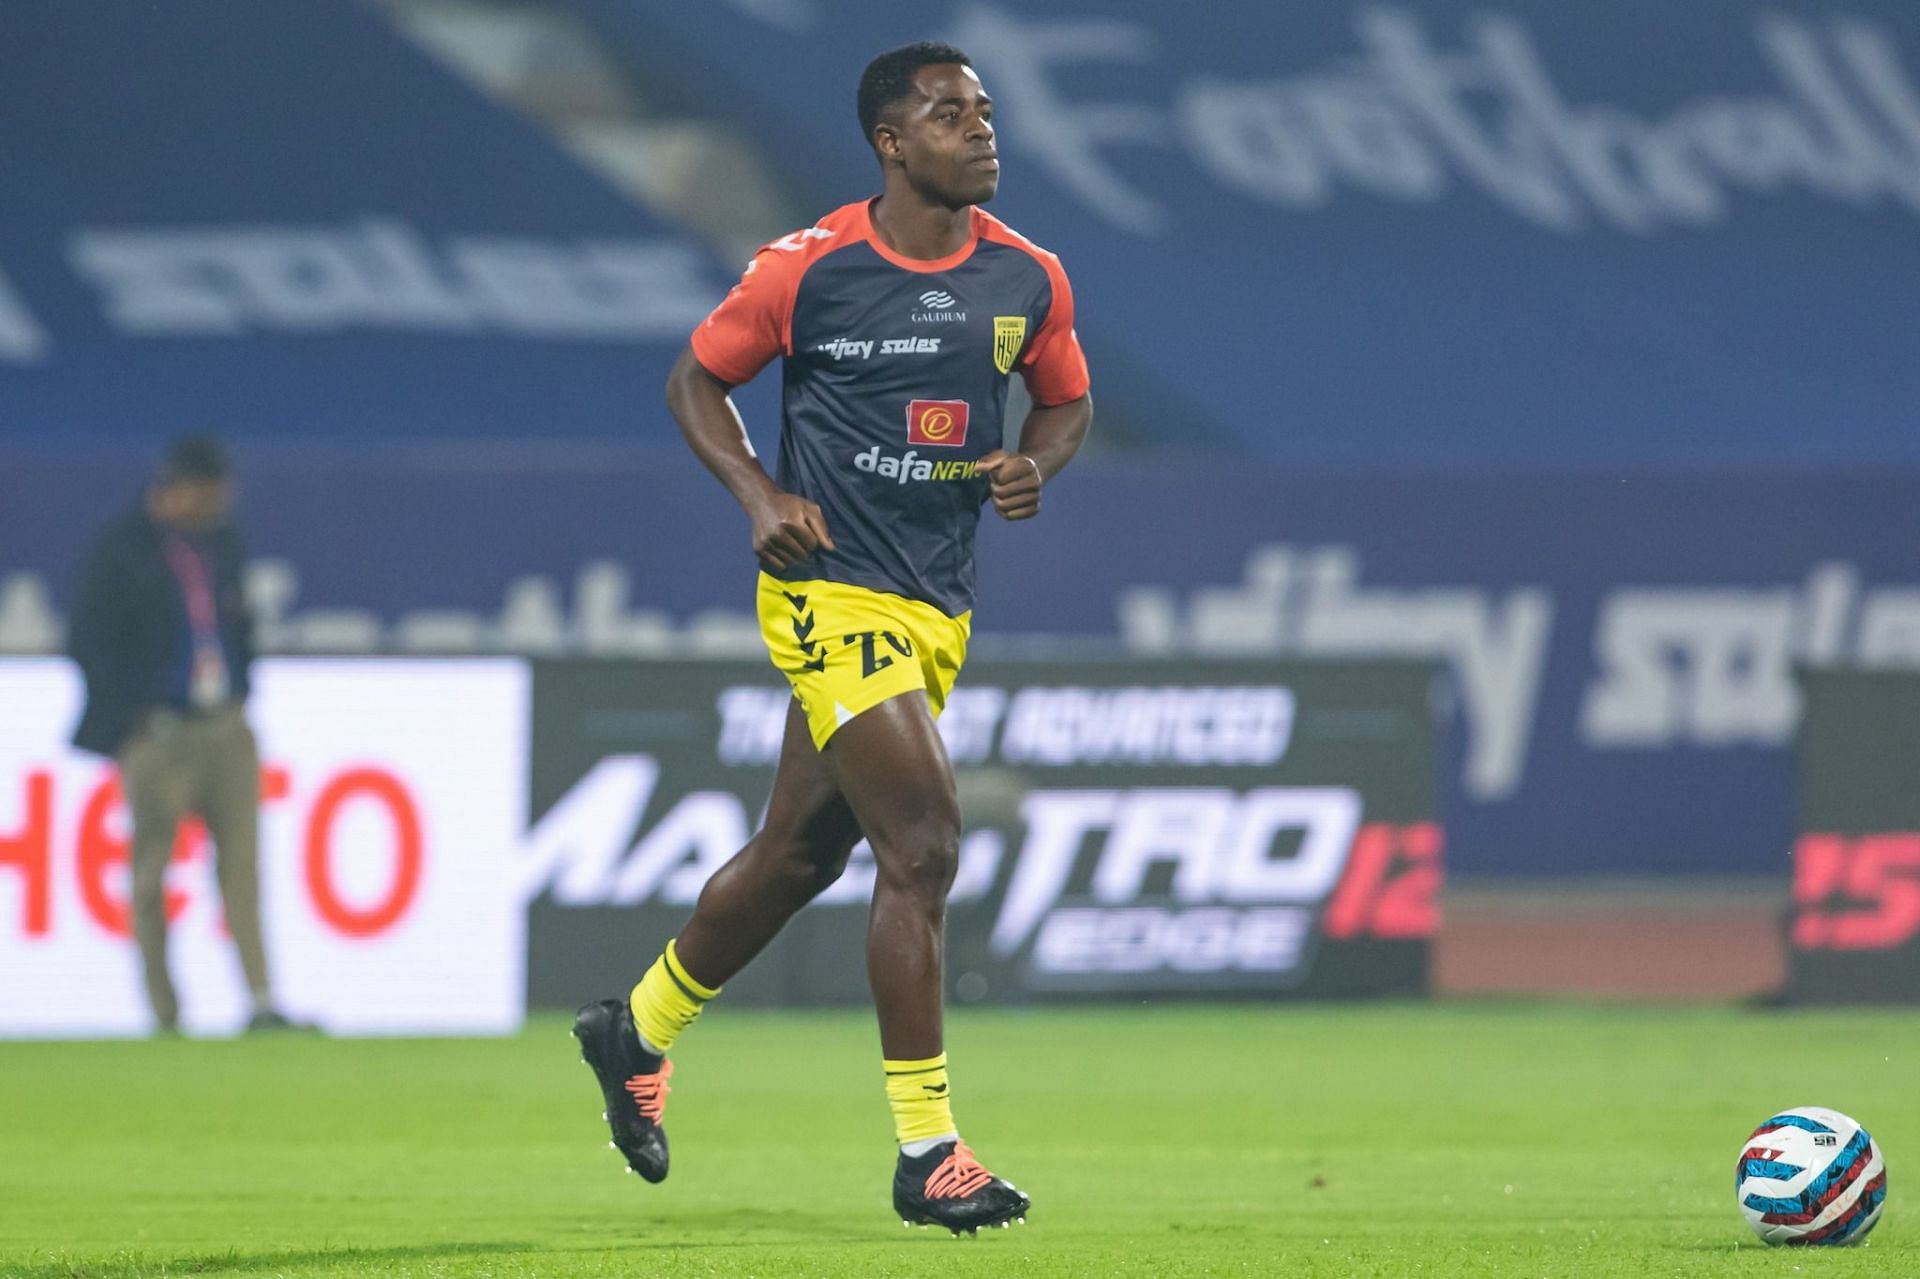 Ogbeche scored the equalizer for Hyderabad FC (Image courtesy: ISL social media)